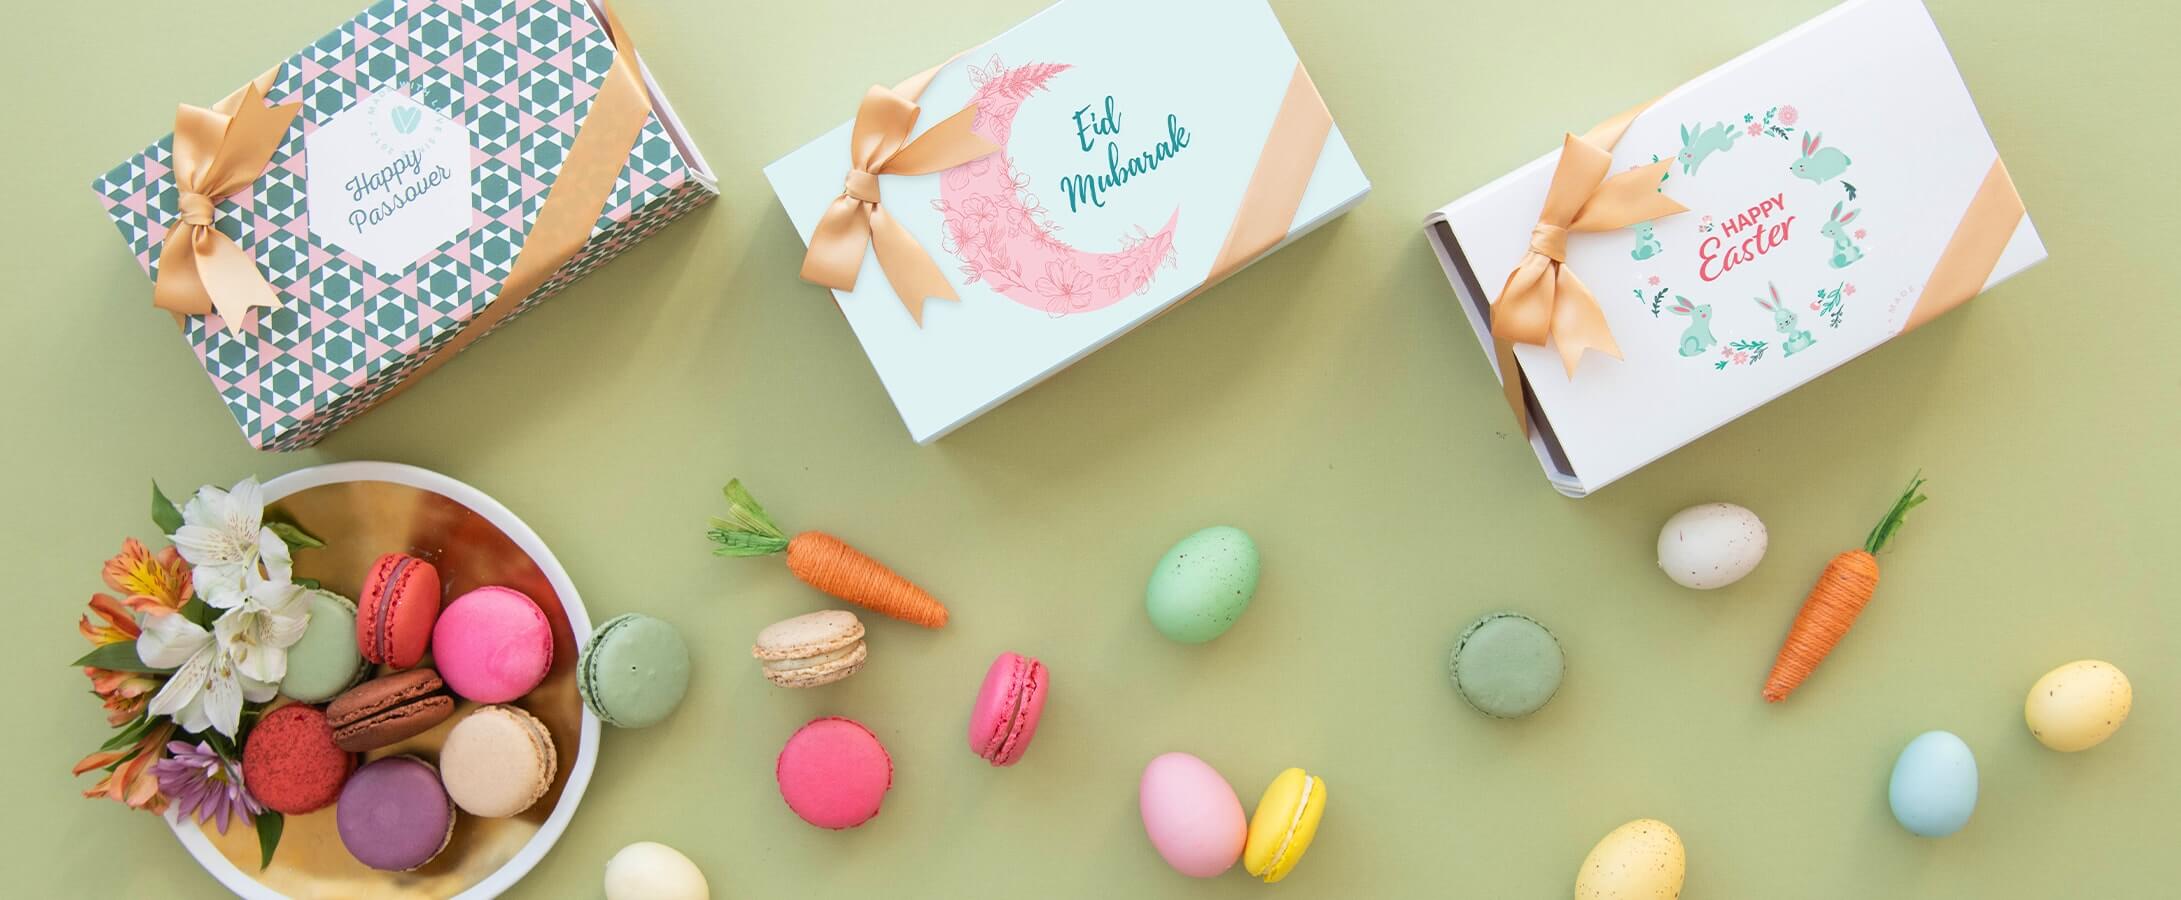 Four Woops! Macaron boxes with Eid, Passover, and Easter sleeves have a plate full of macarons and flowers plus several macarons, eggs, and carrots below.